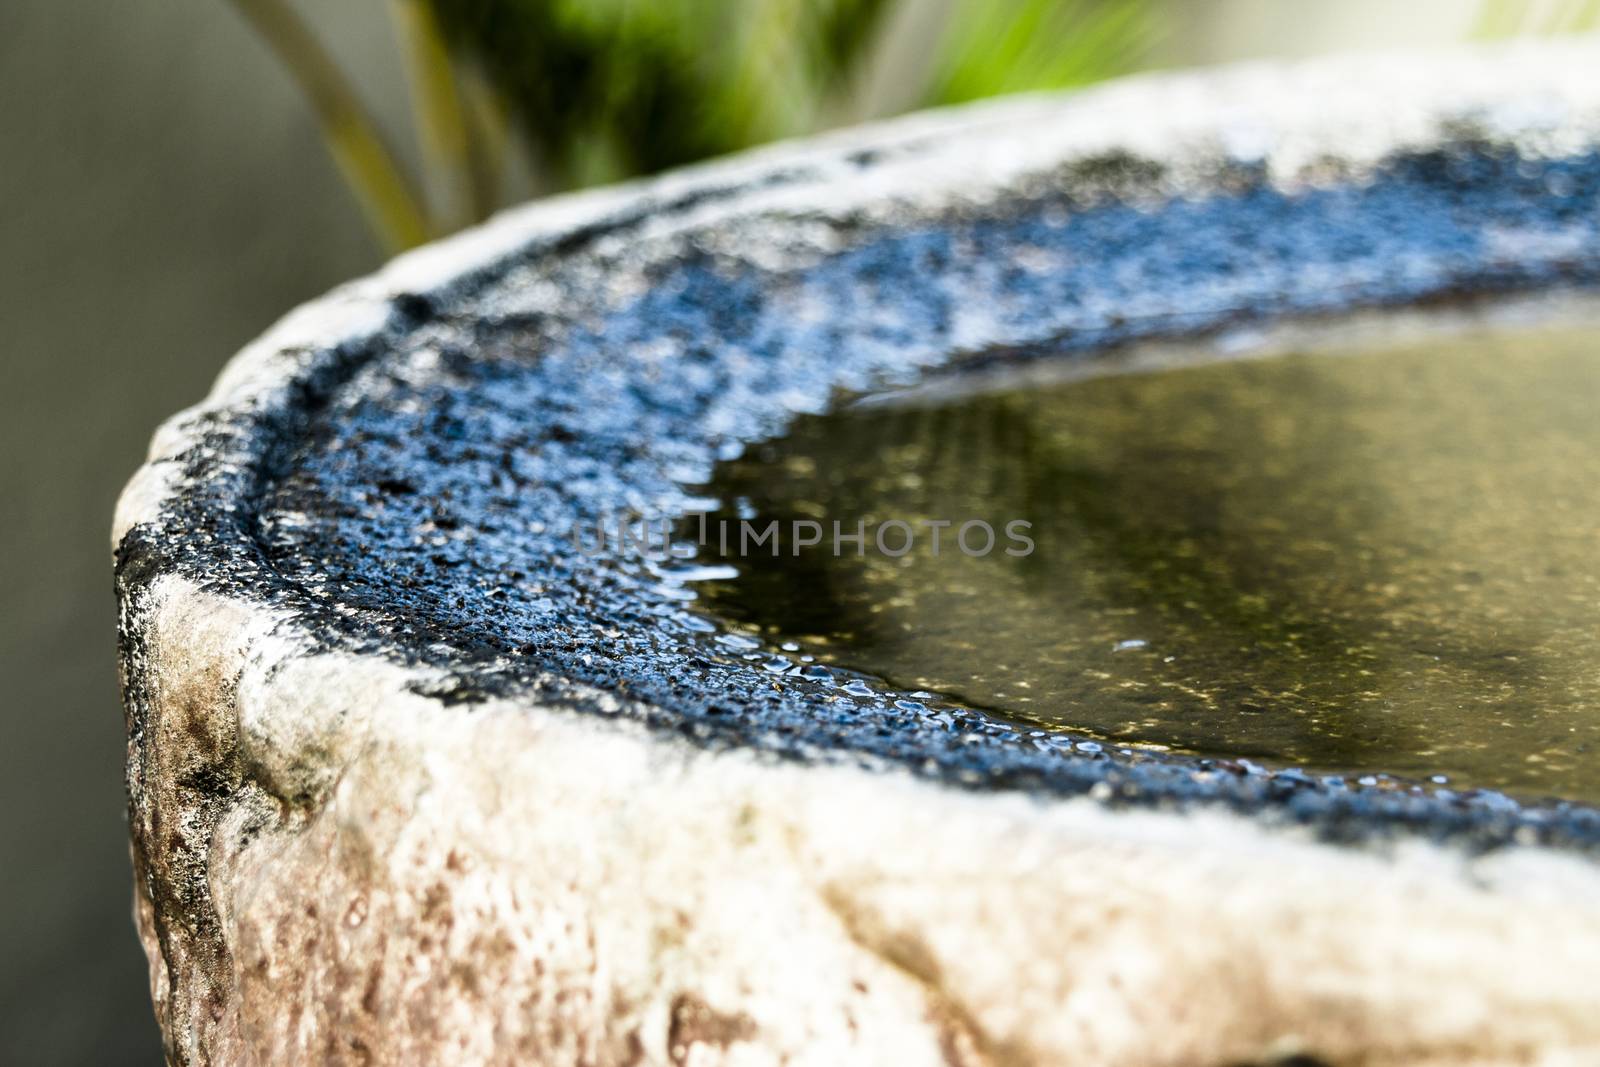 a close up of the side of a dirty bird bath with clear water in it